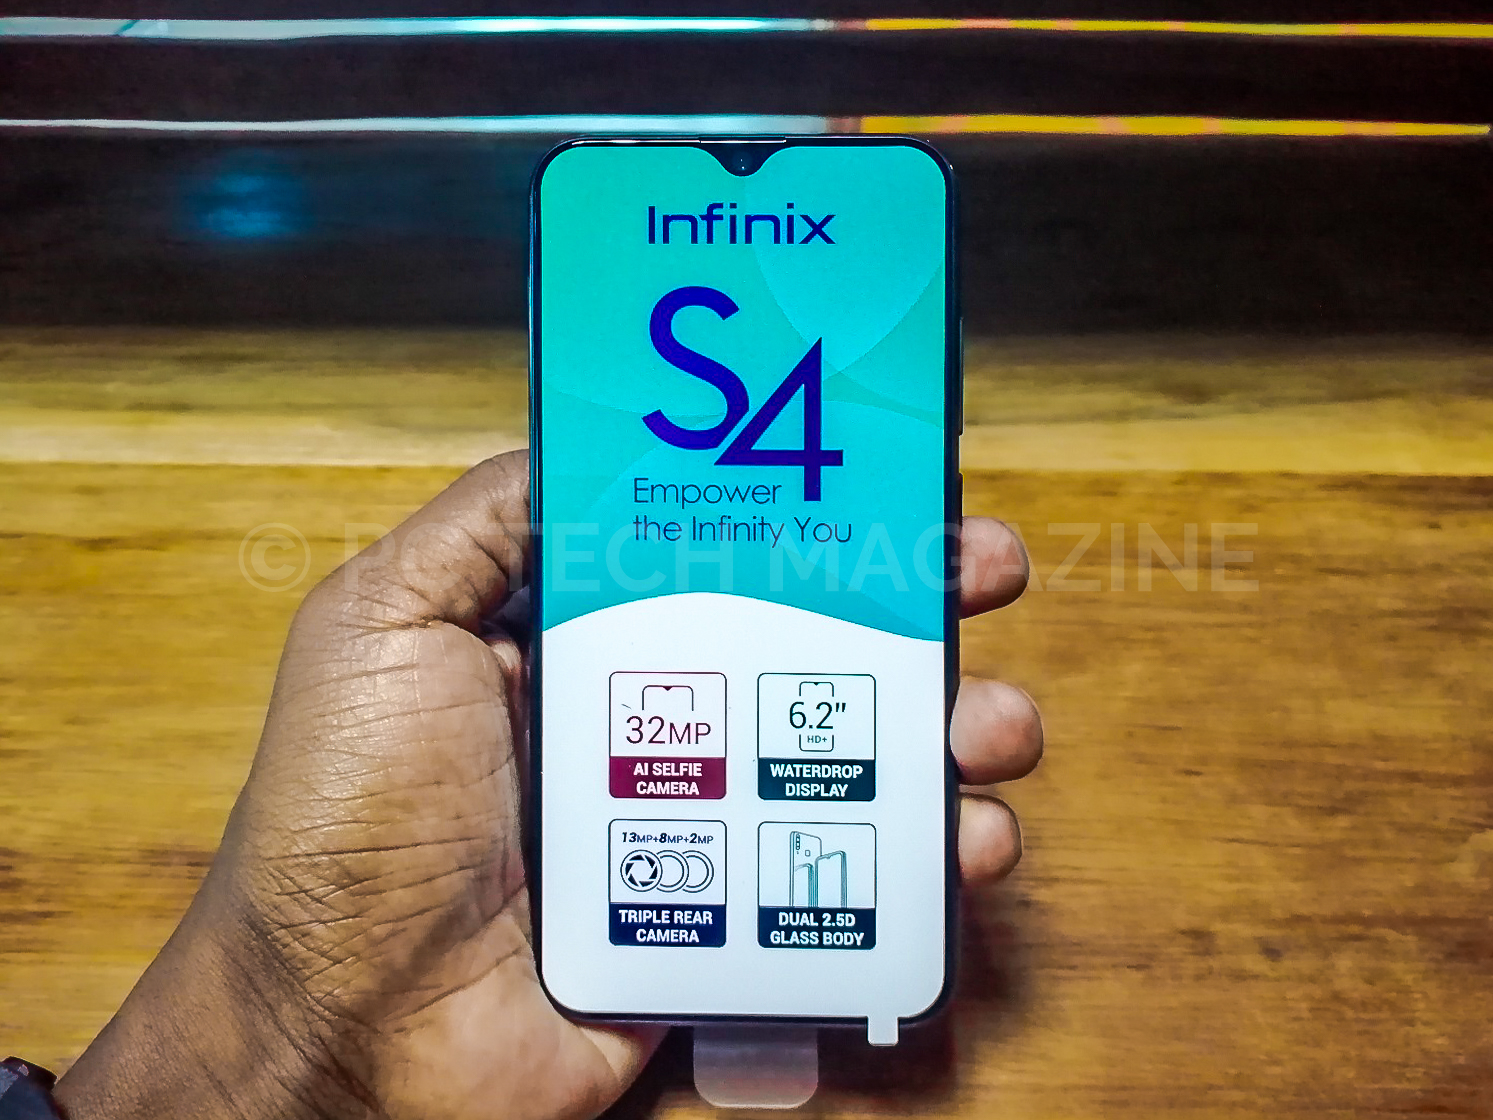 The Infinix S4 is the newest smartphone in the infinix s-series smartphones which comes as the first infinix smartphone with a water-drop notch display.